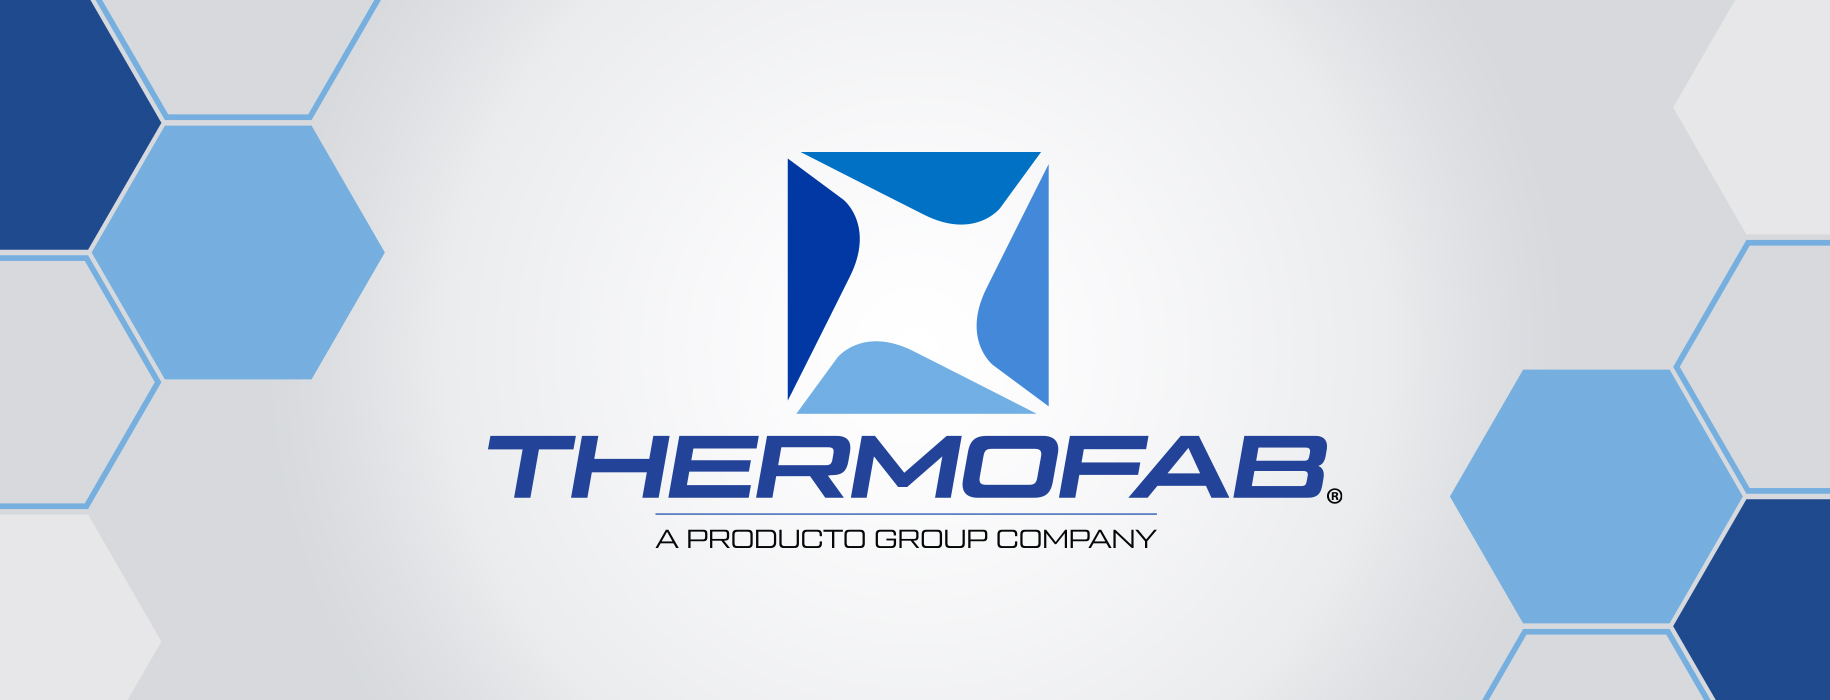 ThermoFab acquisition